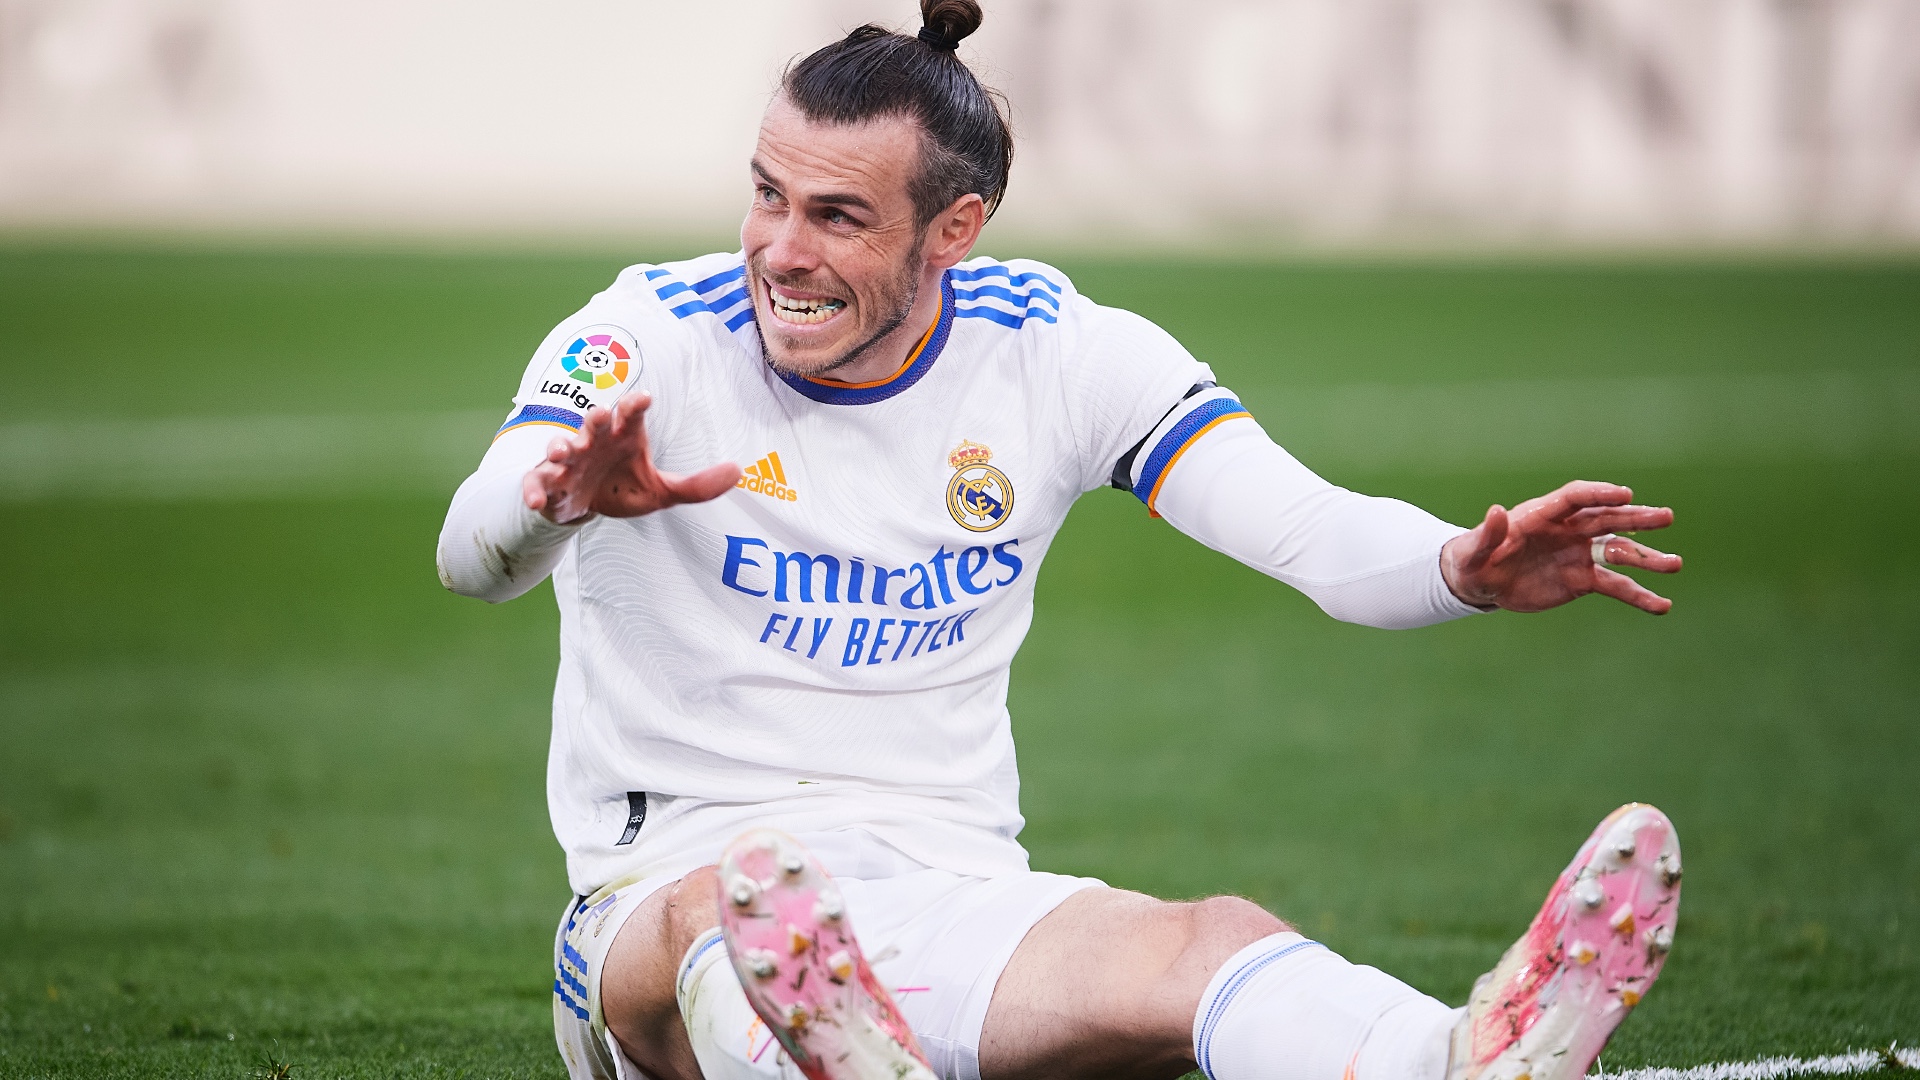 Bale absent from Real Madrid squad for final match despite Ancelotti's send-off remarks